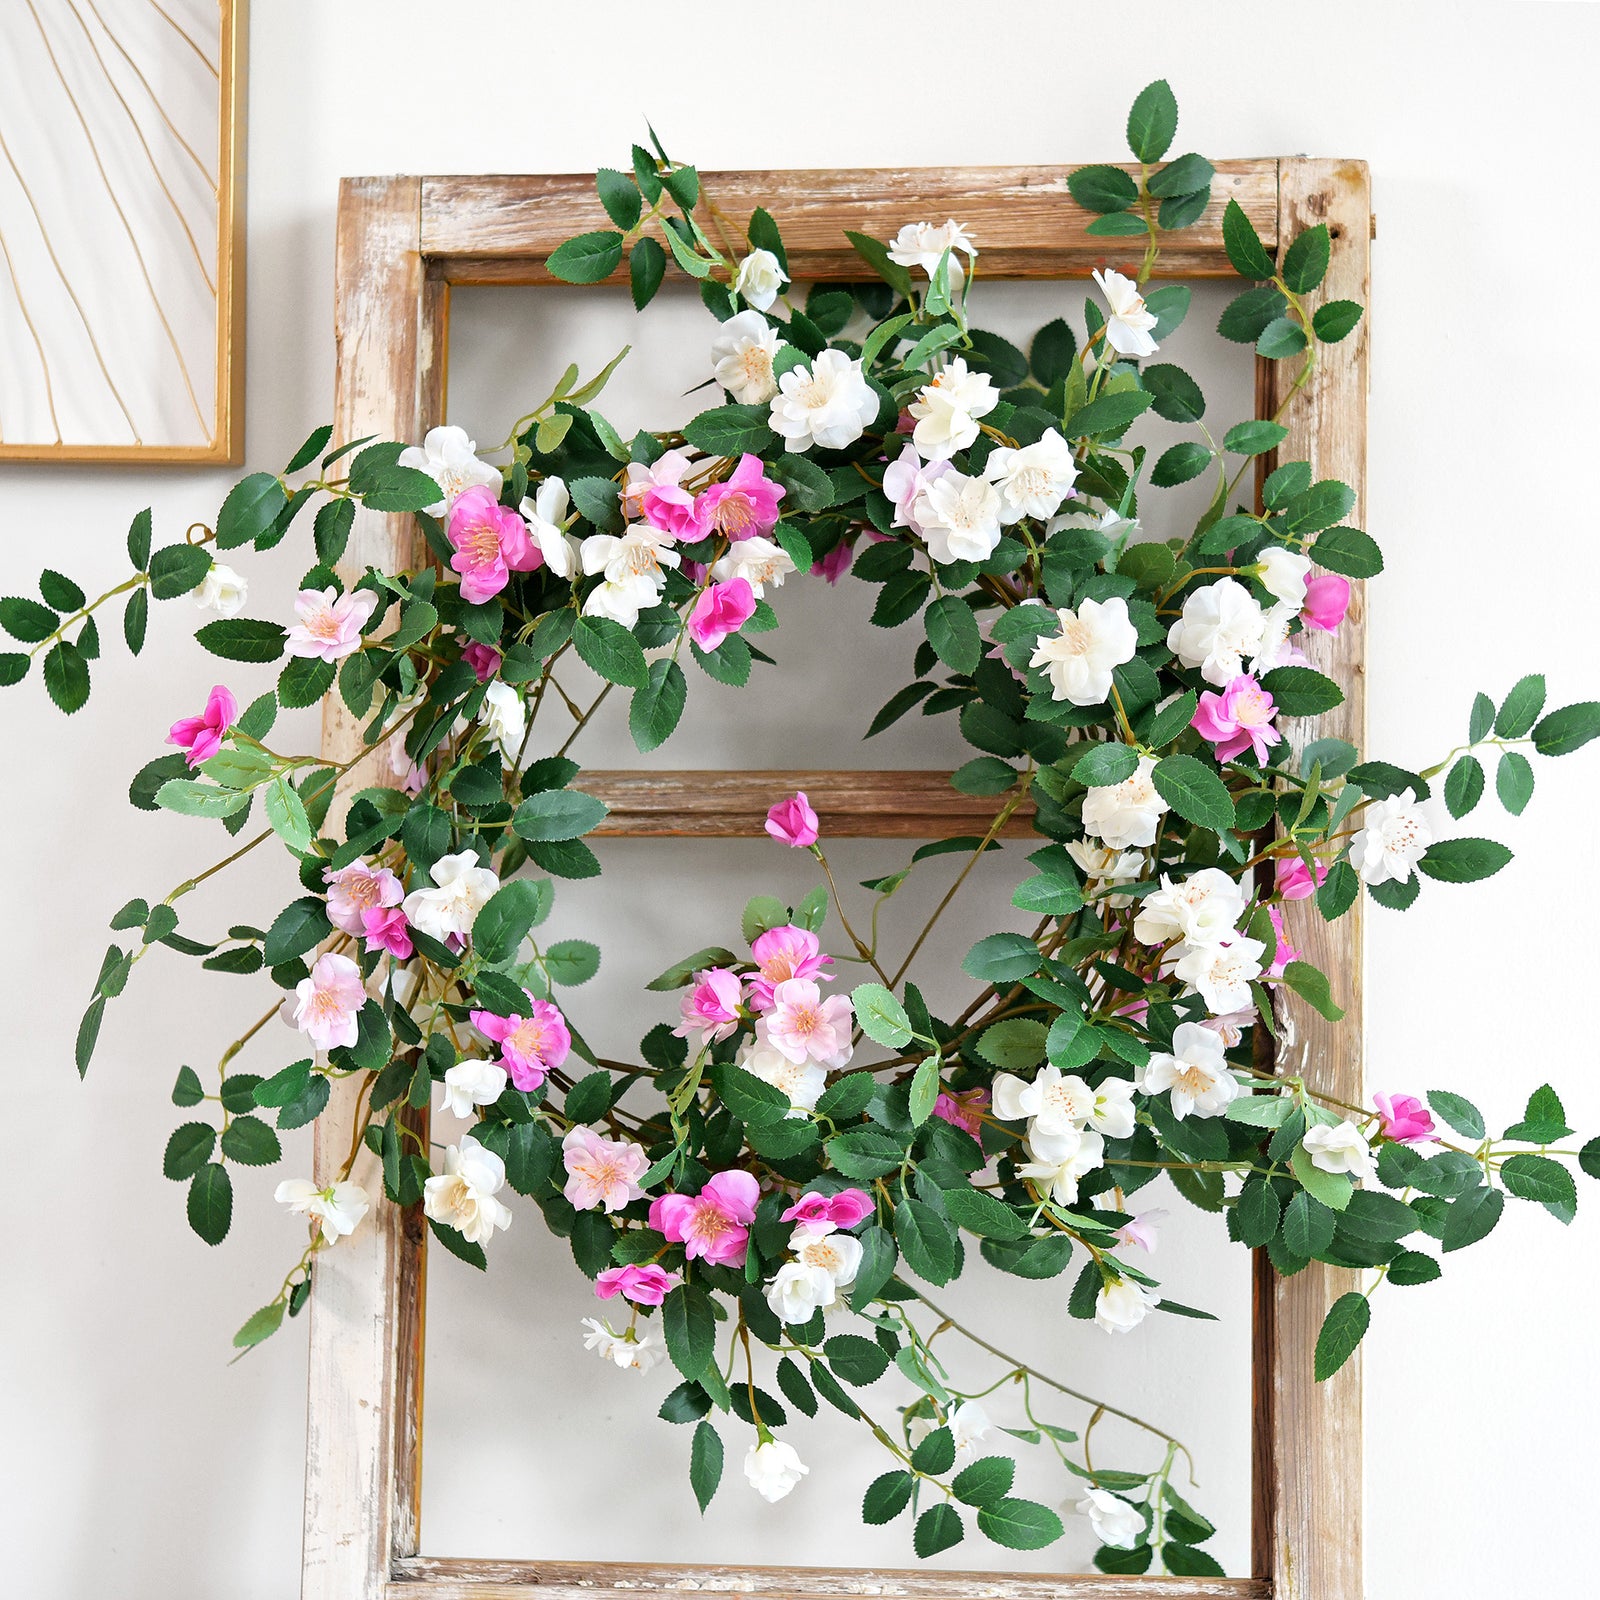 12ft 2 Bendable Flower White Garlands Artificial Silk Wild Rose Vine Leaves Hanging Flowers for Wall Decoration